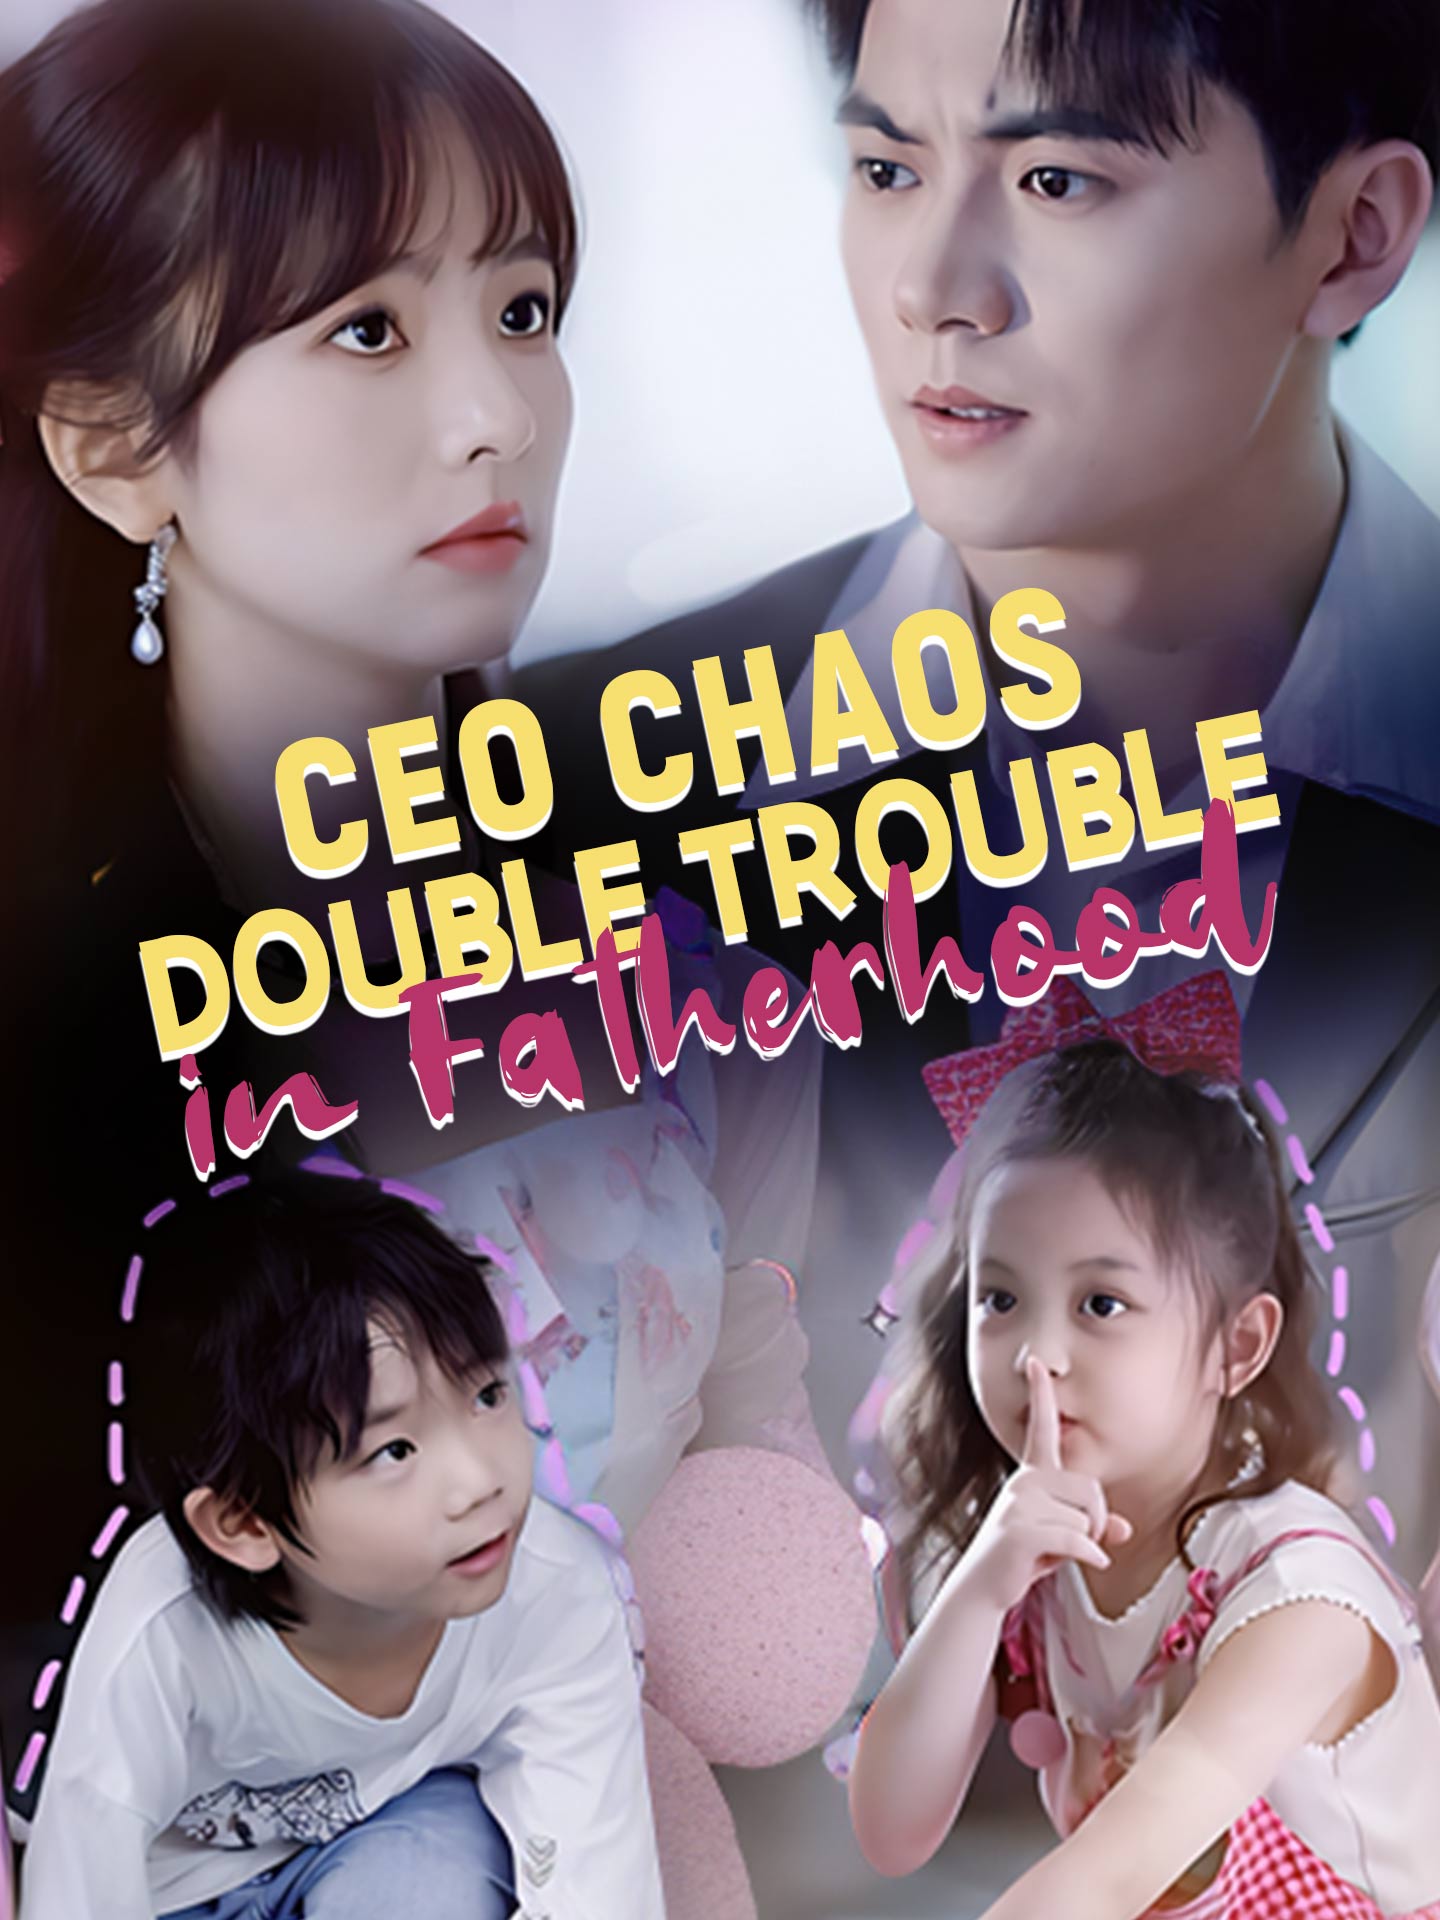 CEO Chaos: Double Trouble in Fatherhood